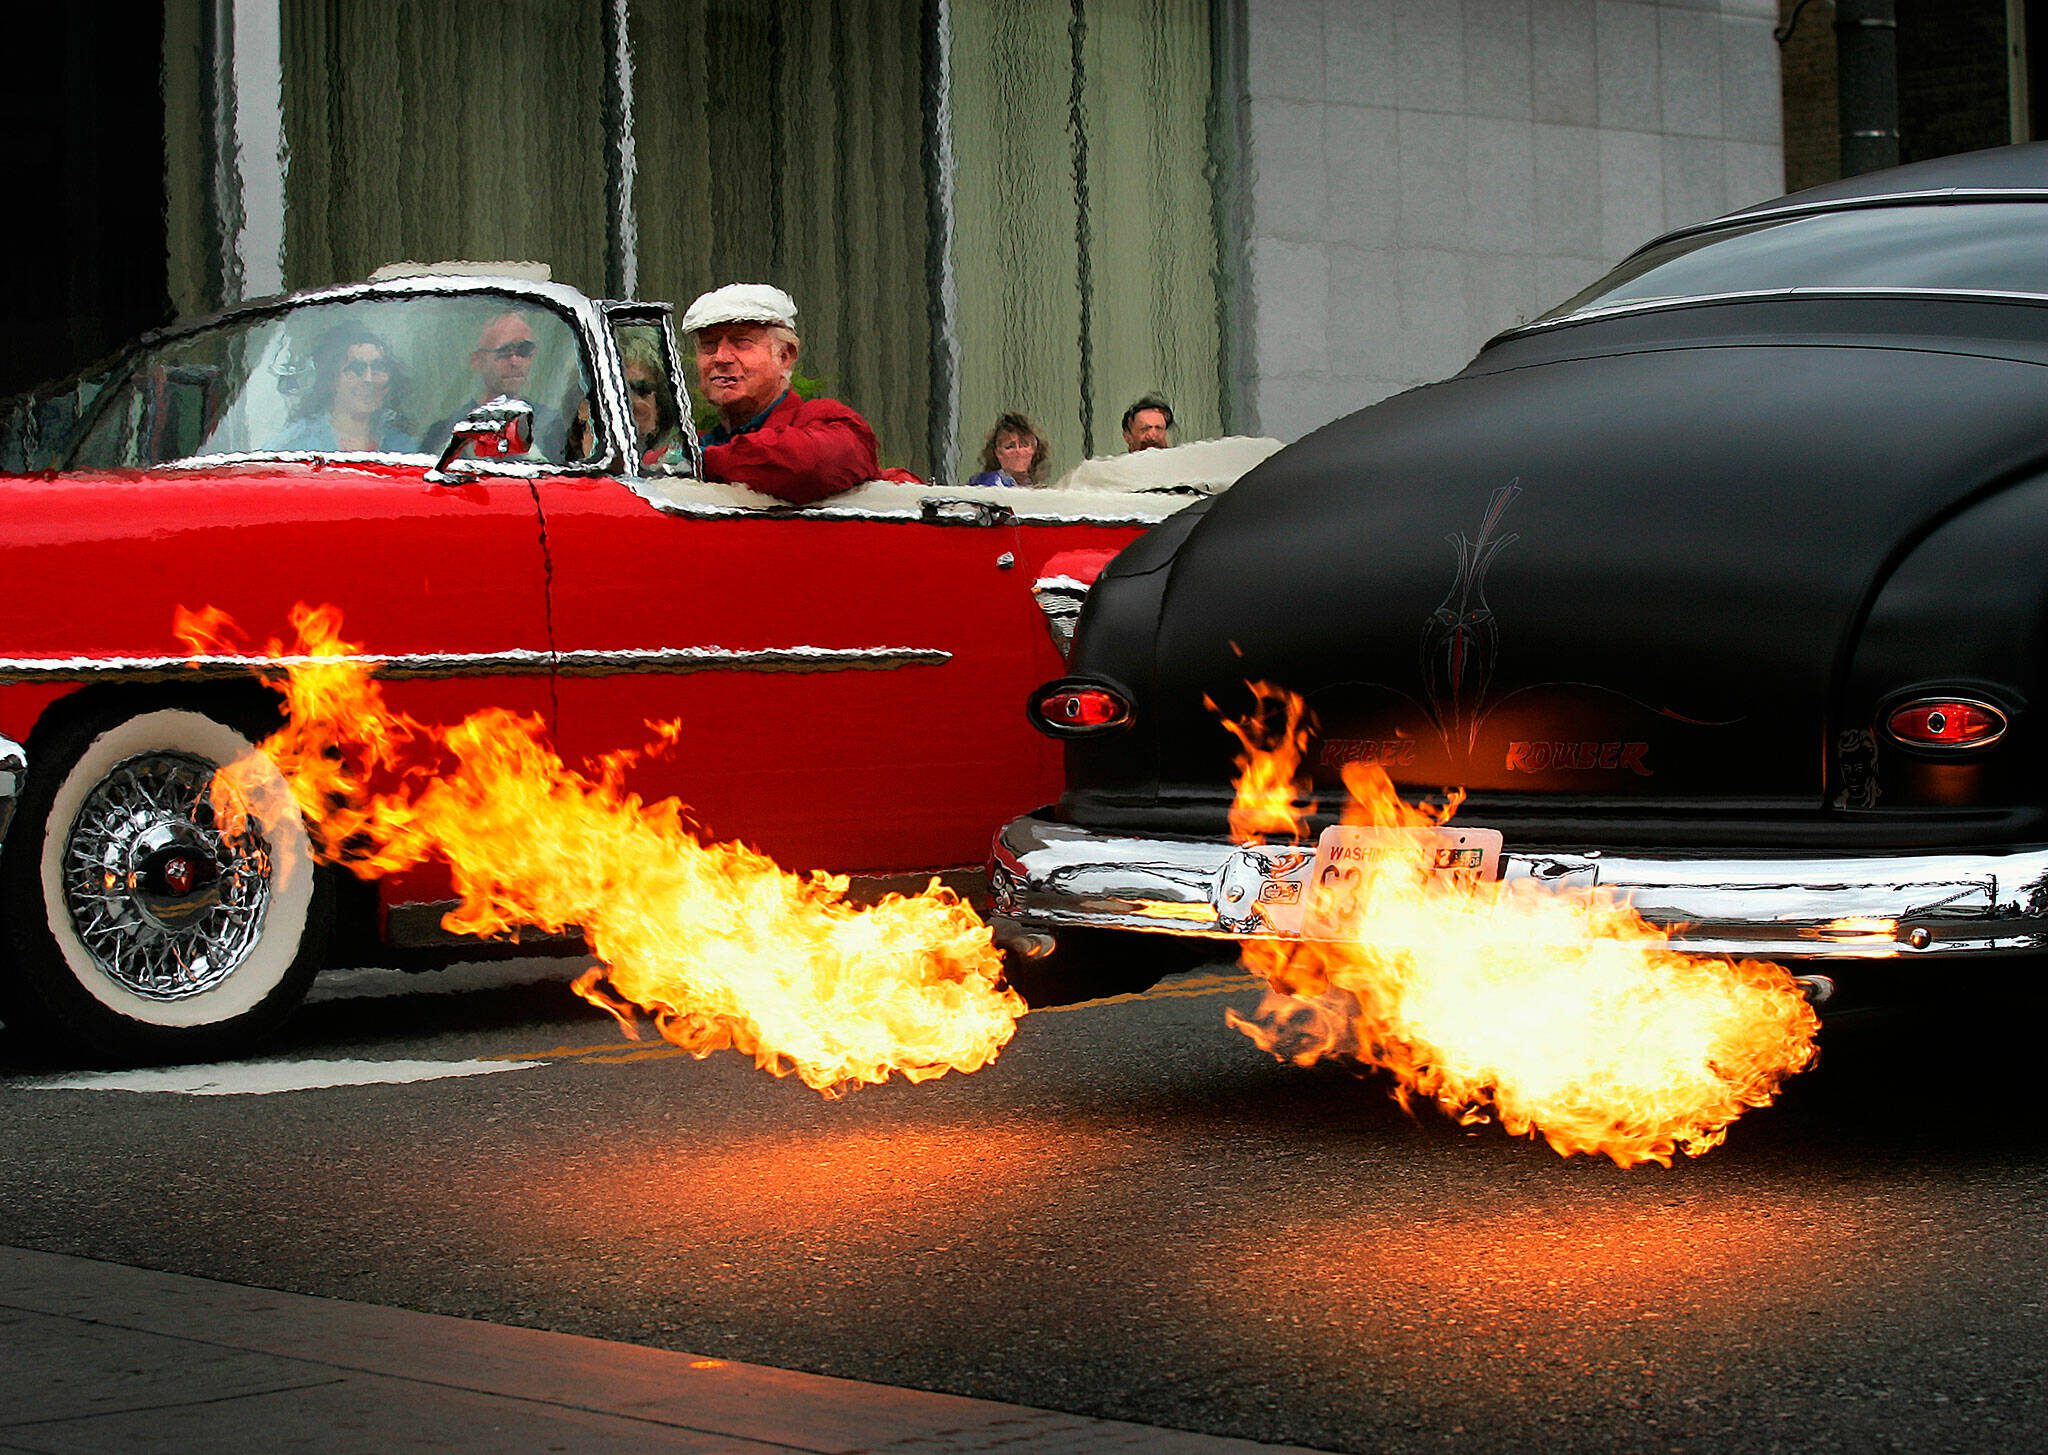 To the amazement of onlookers, flames shoot out the exhaust pipes on Les Sanders’ black 1950 Mercury Coupe as he drives up and down Colby Avenue with many others in classic and custom automobiles during one of the many popular Cruzin’ to Colby events held each summer in Everett. (Dan Bates / The Herald)